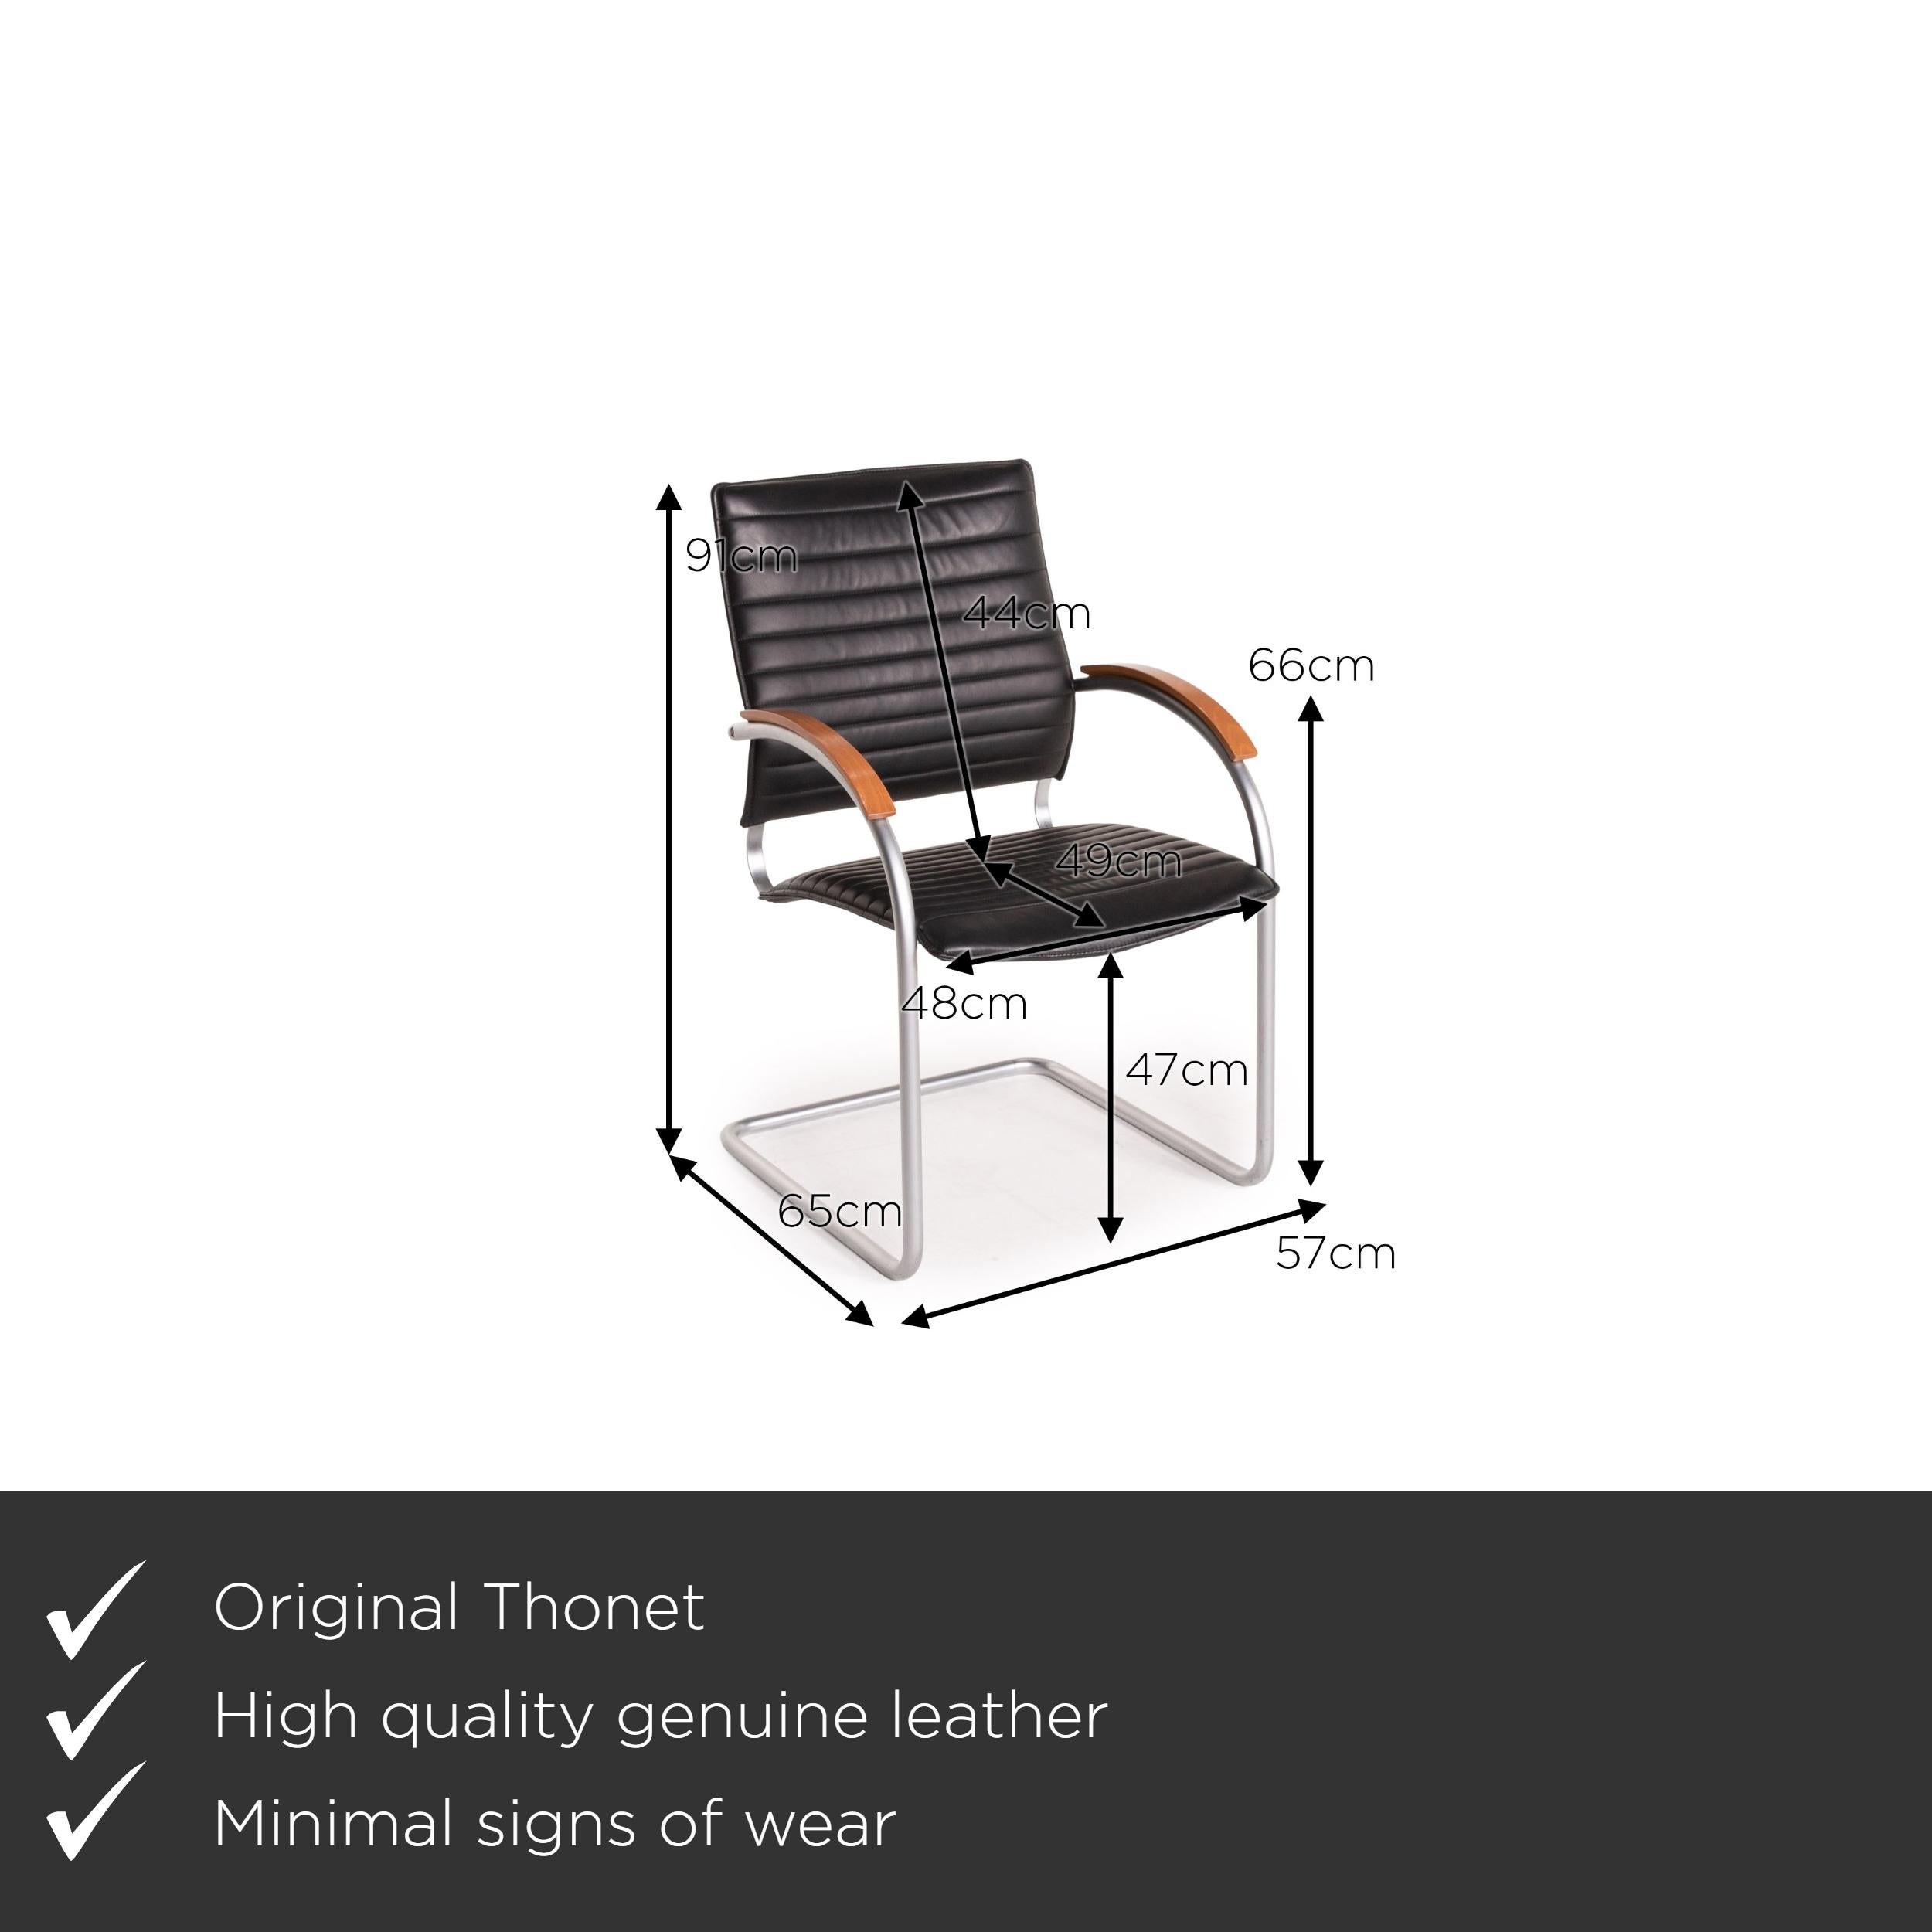 We present to you a Thonet S 74 leather chair black cantilever.



 Product measurements in centimeters:
 

Depth 65
Width 57
Height 91
Seat height 47
Rest height 66
Seat depth 49
Seat width 48
Back height 44.